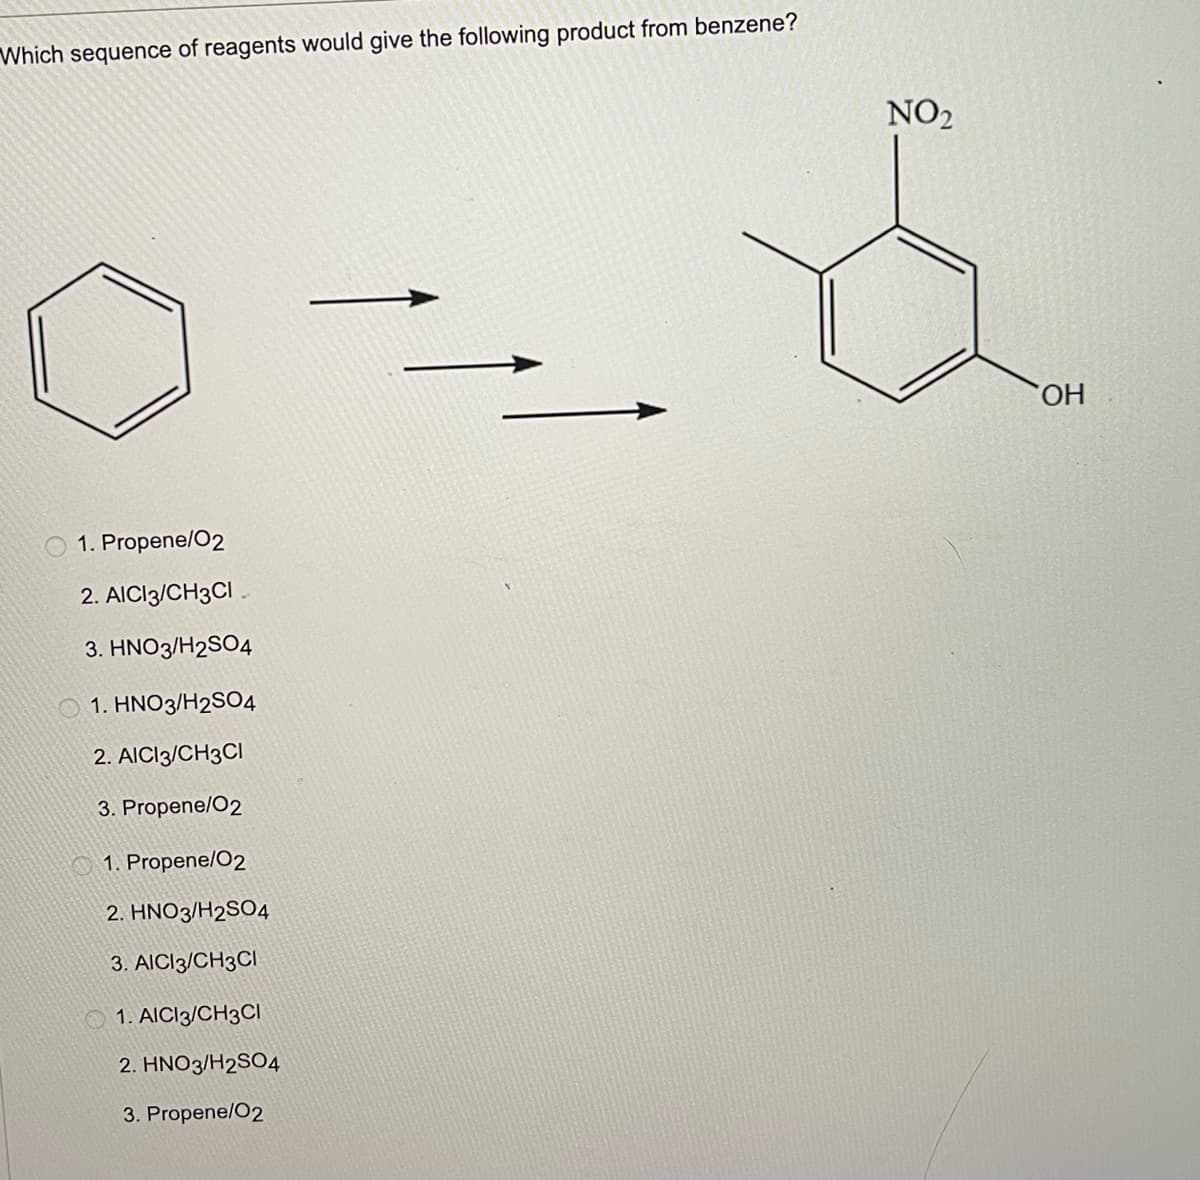 Which sequence of reagents would give the following product from benzene?
NO2
HO.
1. Propene/O2
2. AICI3/CH3CI .
3. HNO3/H2SO4
O 1. HNO3/H2SO4
2. AICI3/CH3CI
3. Propene/O2
O 1. Propene/O2
2. HNO3/H2SO4
3. AICI3/CH3CI
O 1. AICI3/CH3CI
2. HNO3/H2SO4
3. Propene/O2
